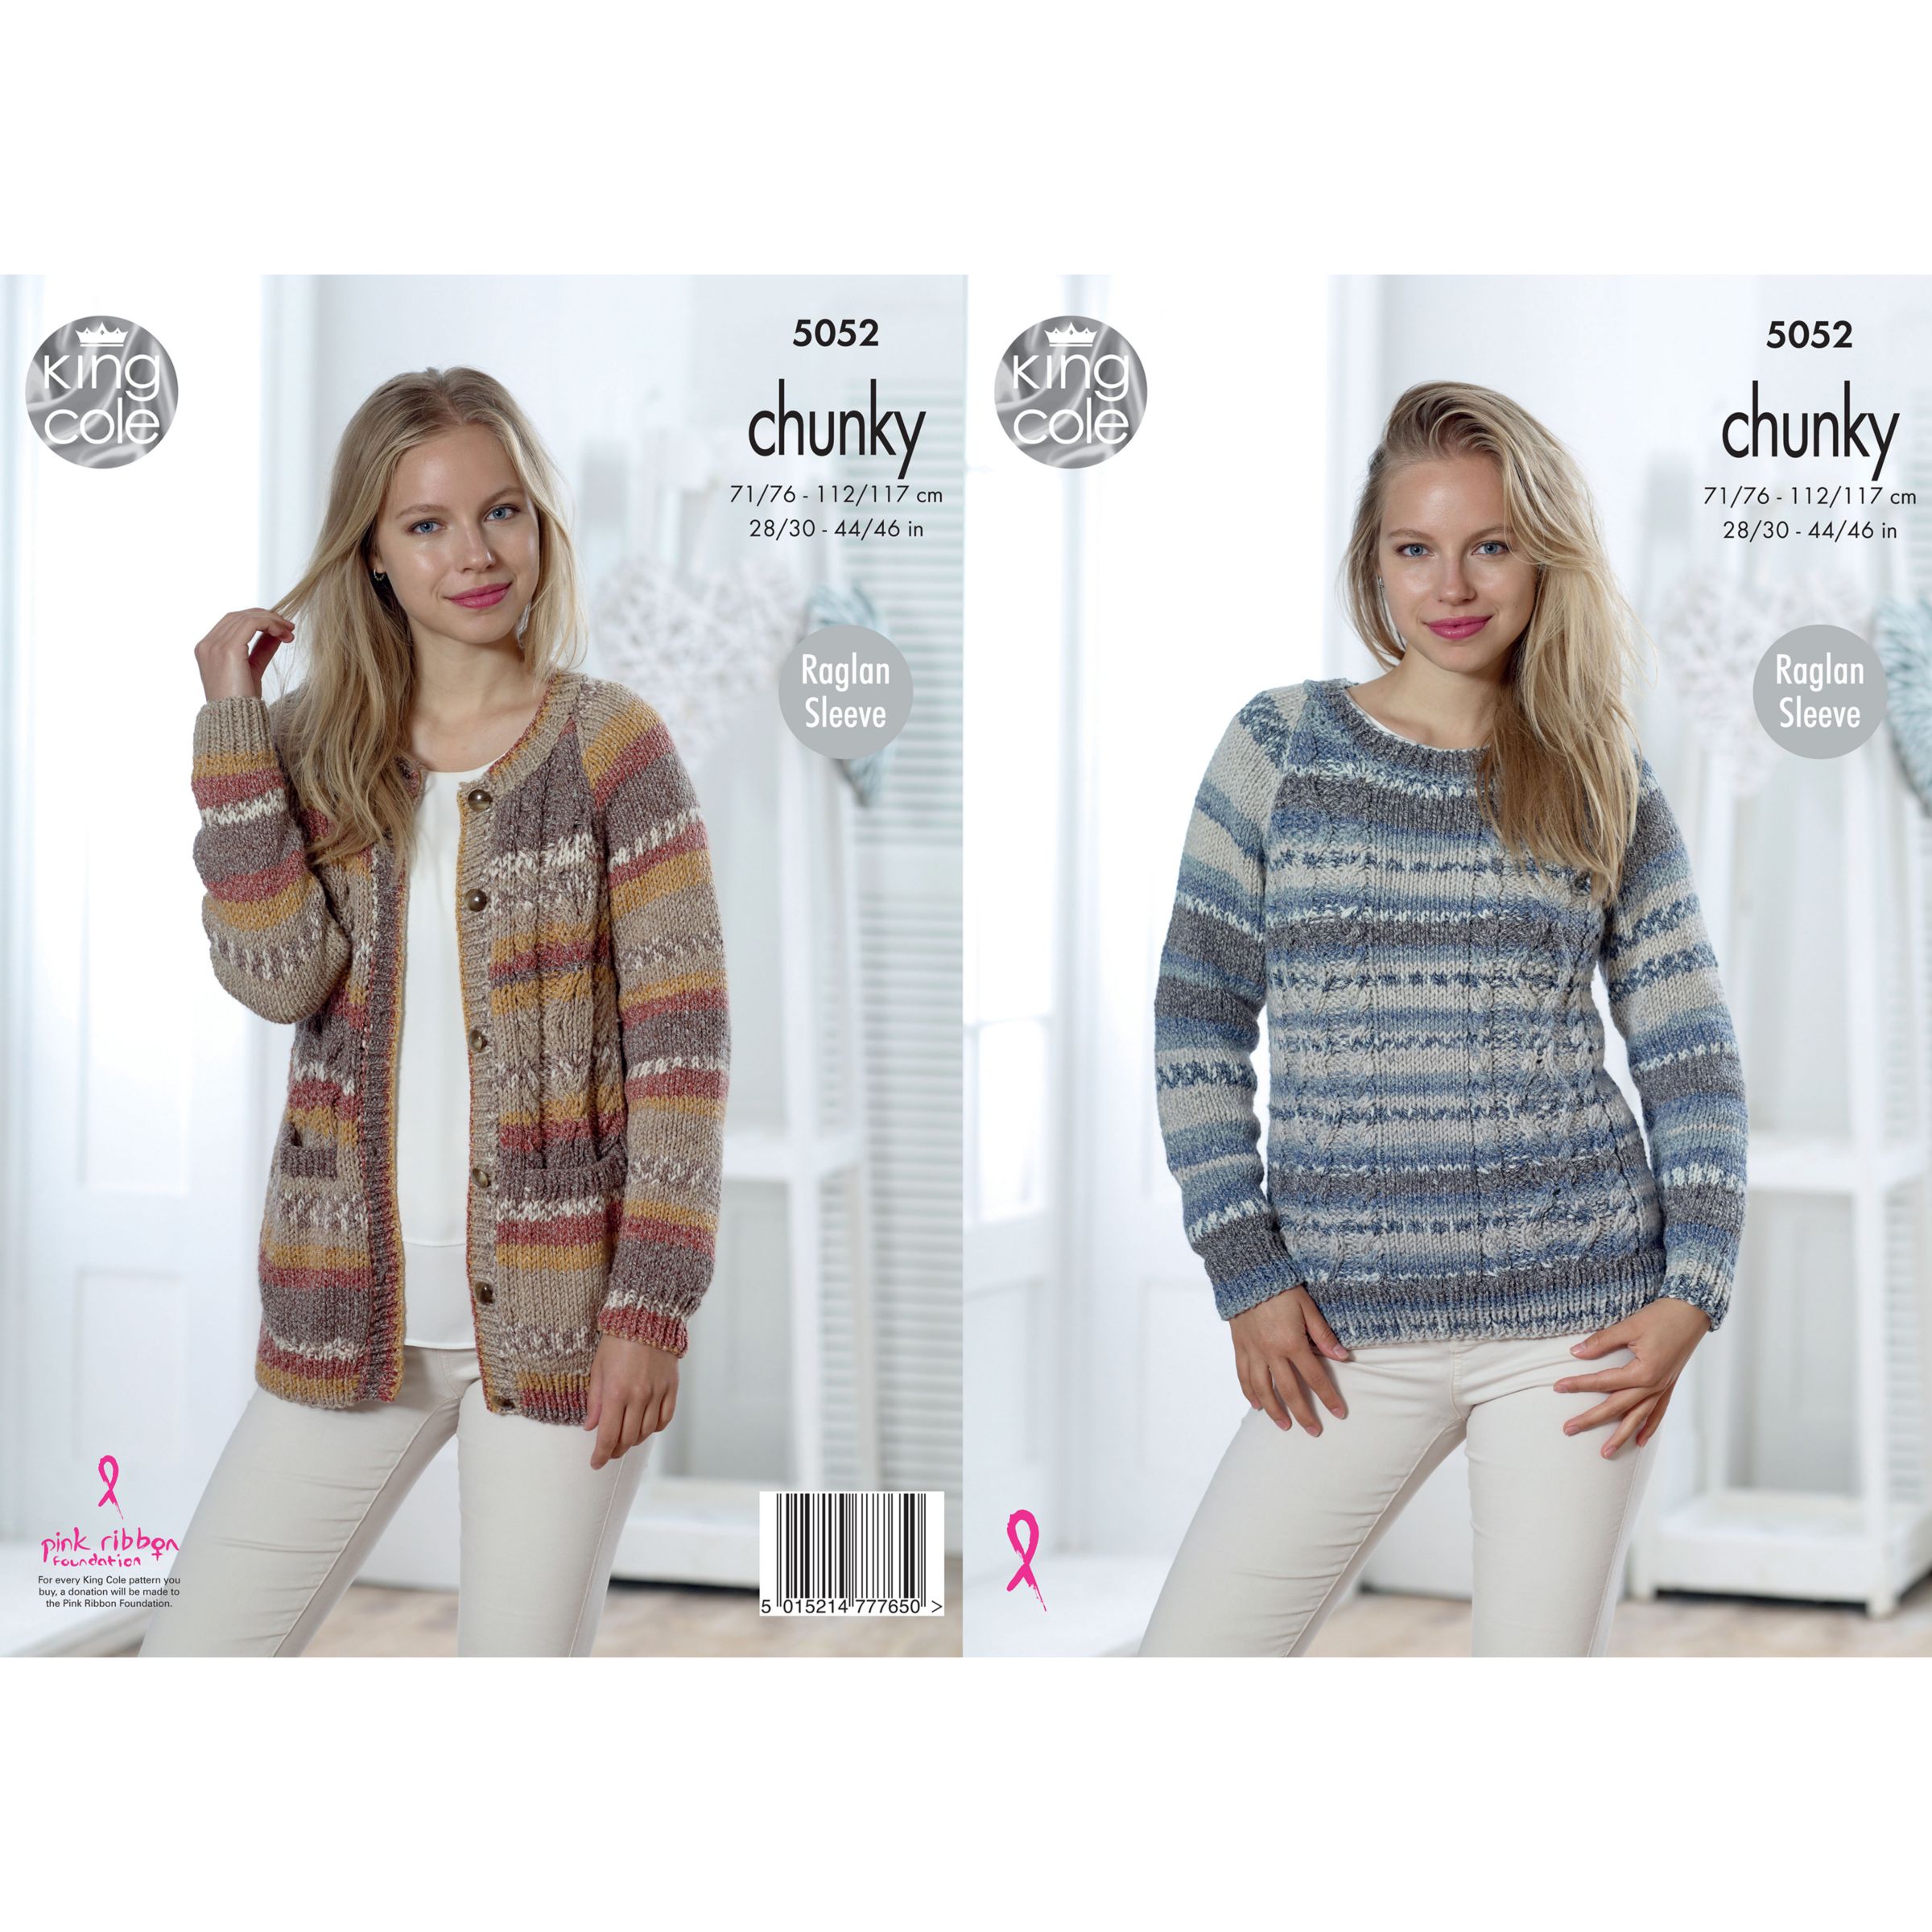 King Cole Drifter Chunky Women's Cardigan And Jumper Knitting Pattern, 5052